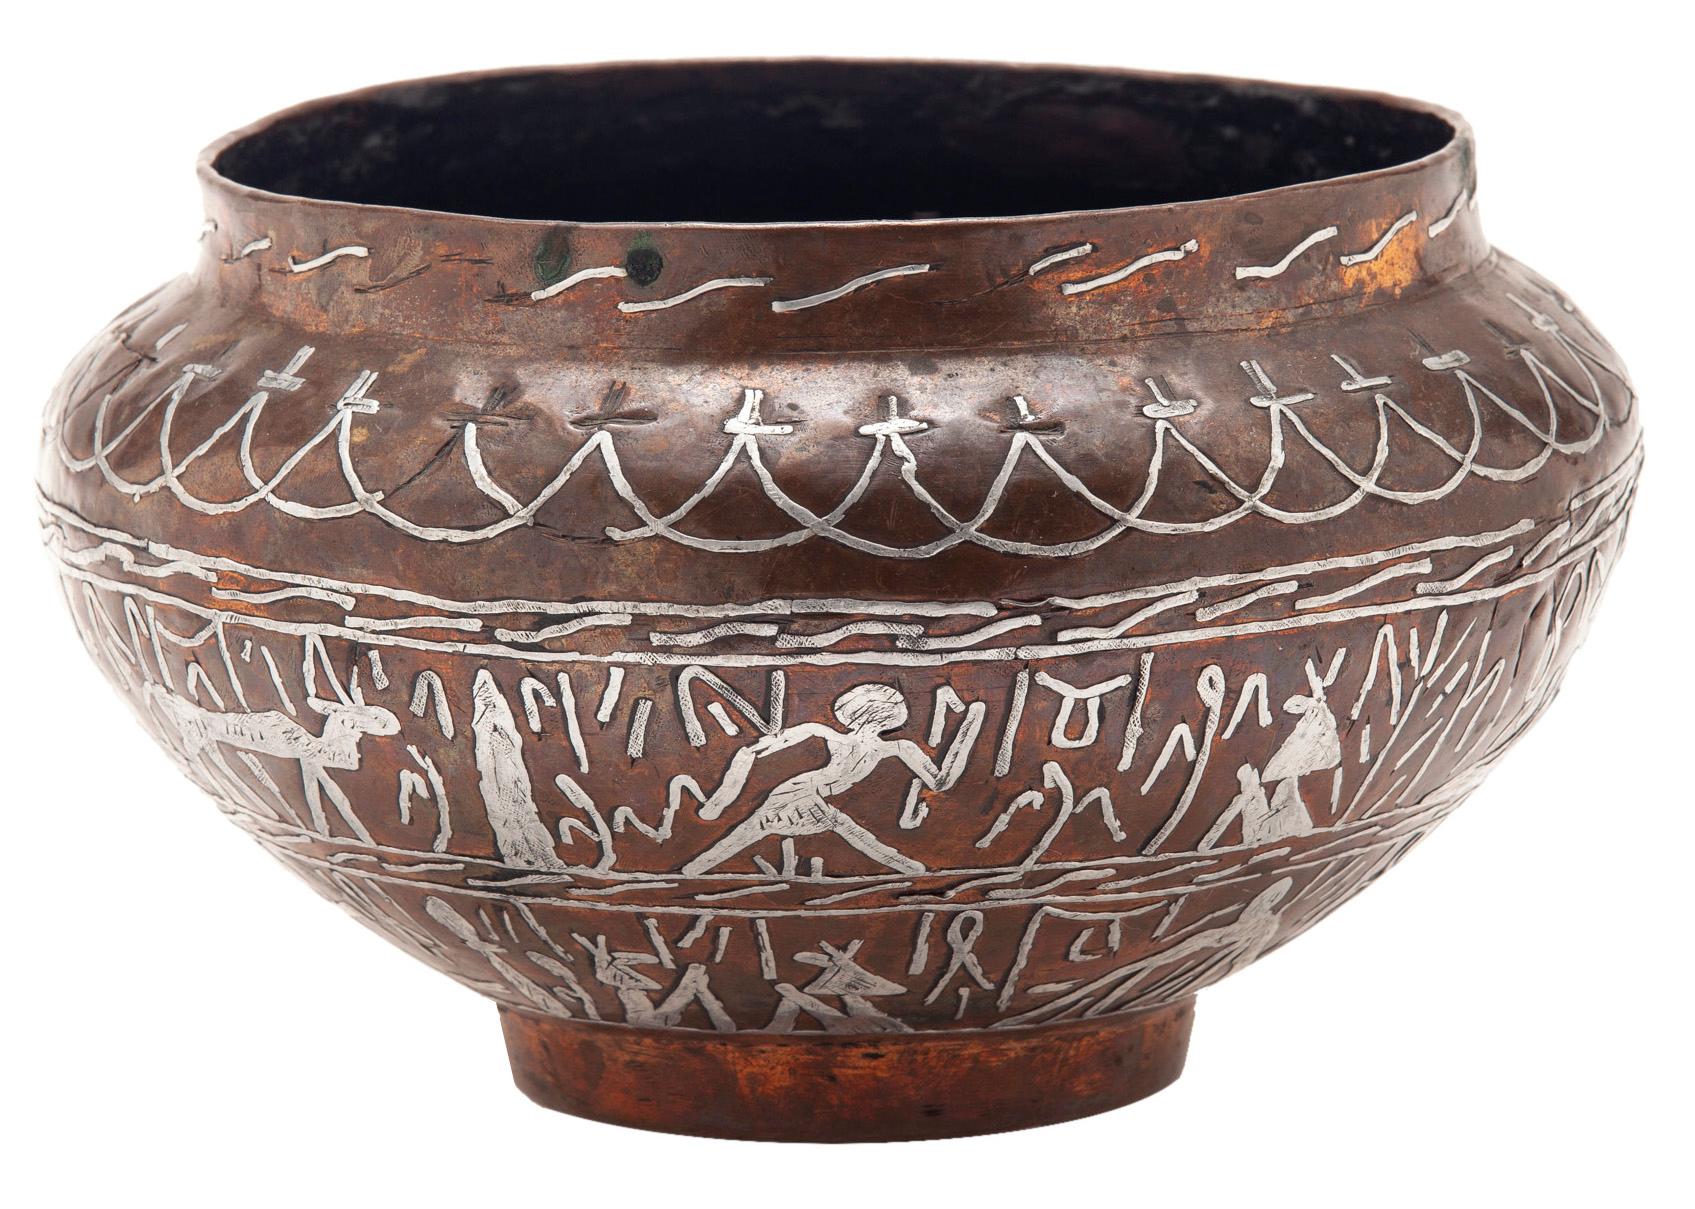 Egyptian copper & silver cache pot in an aged coppery finish that features attention to detail. The fine silver inlay work in the style of artisans from the old Egyptian market in Cairo.
The stylized calligraphy & Egyptian hieroglyphics are inset